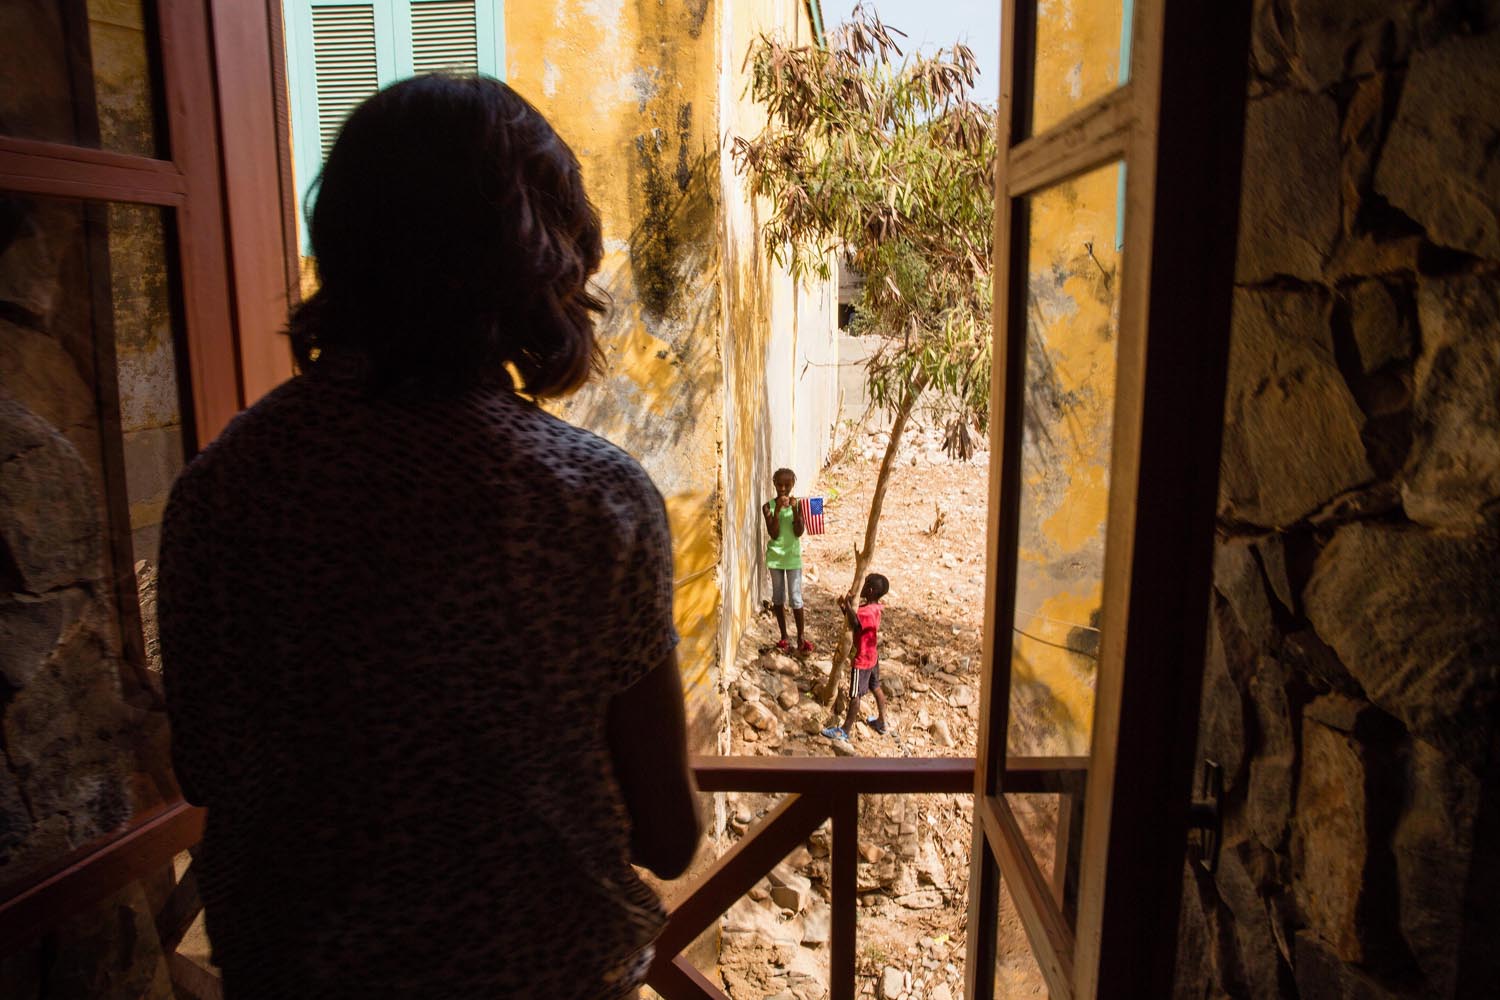 June 27, 2013. First Lady Michelle Obama looks out a window at local children during her visit to a cultural center on Gorée Island, Senegal.